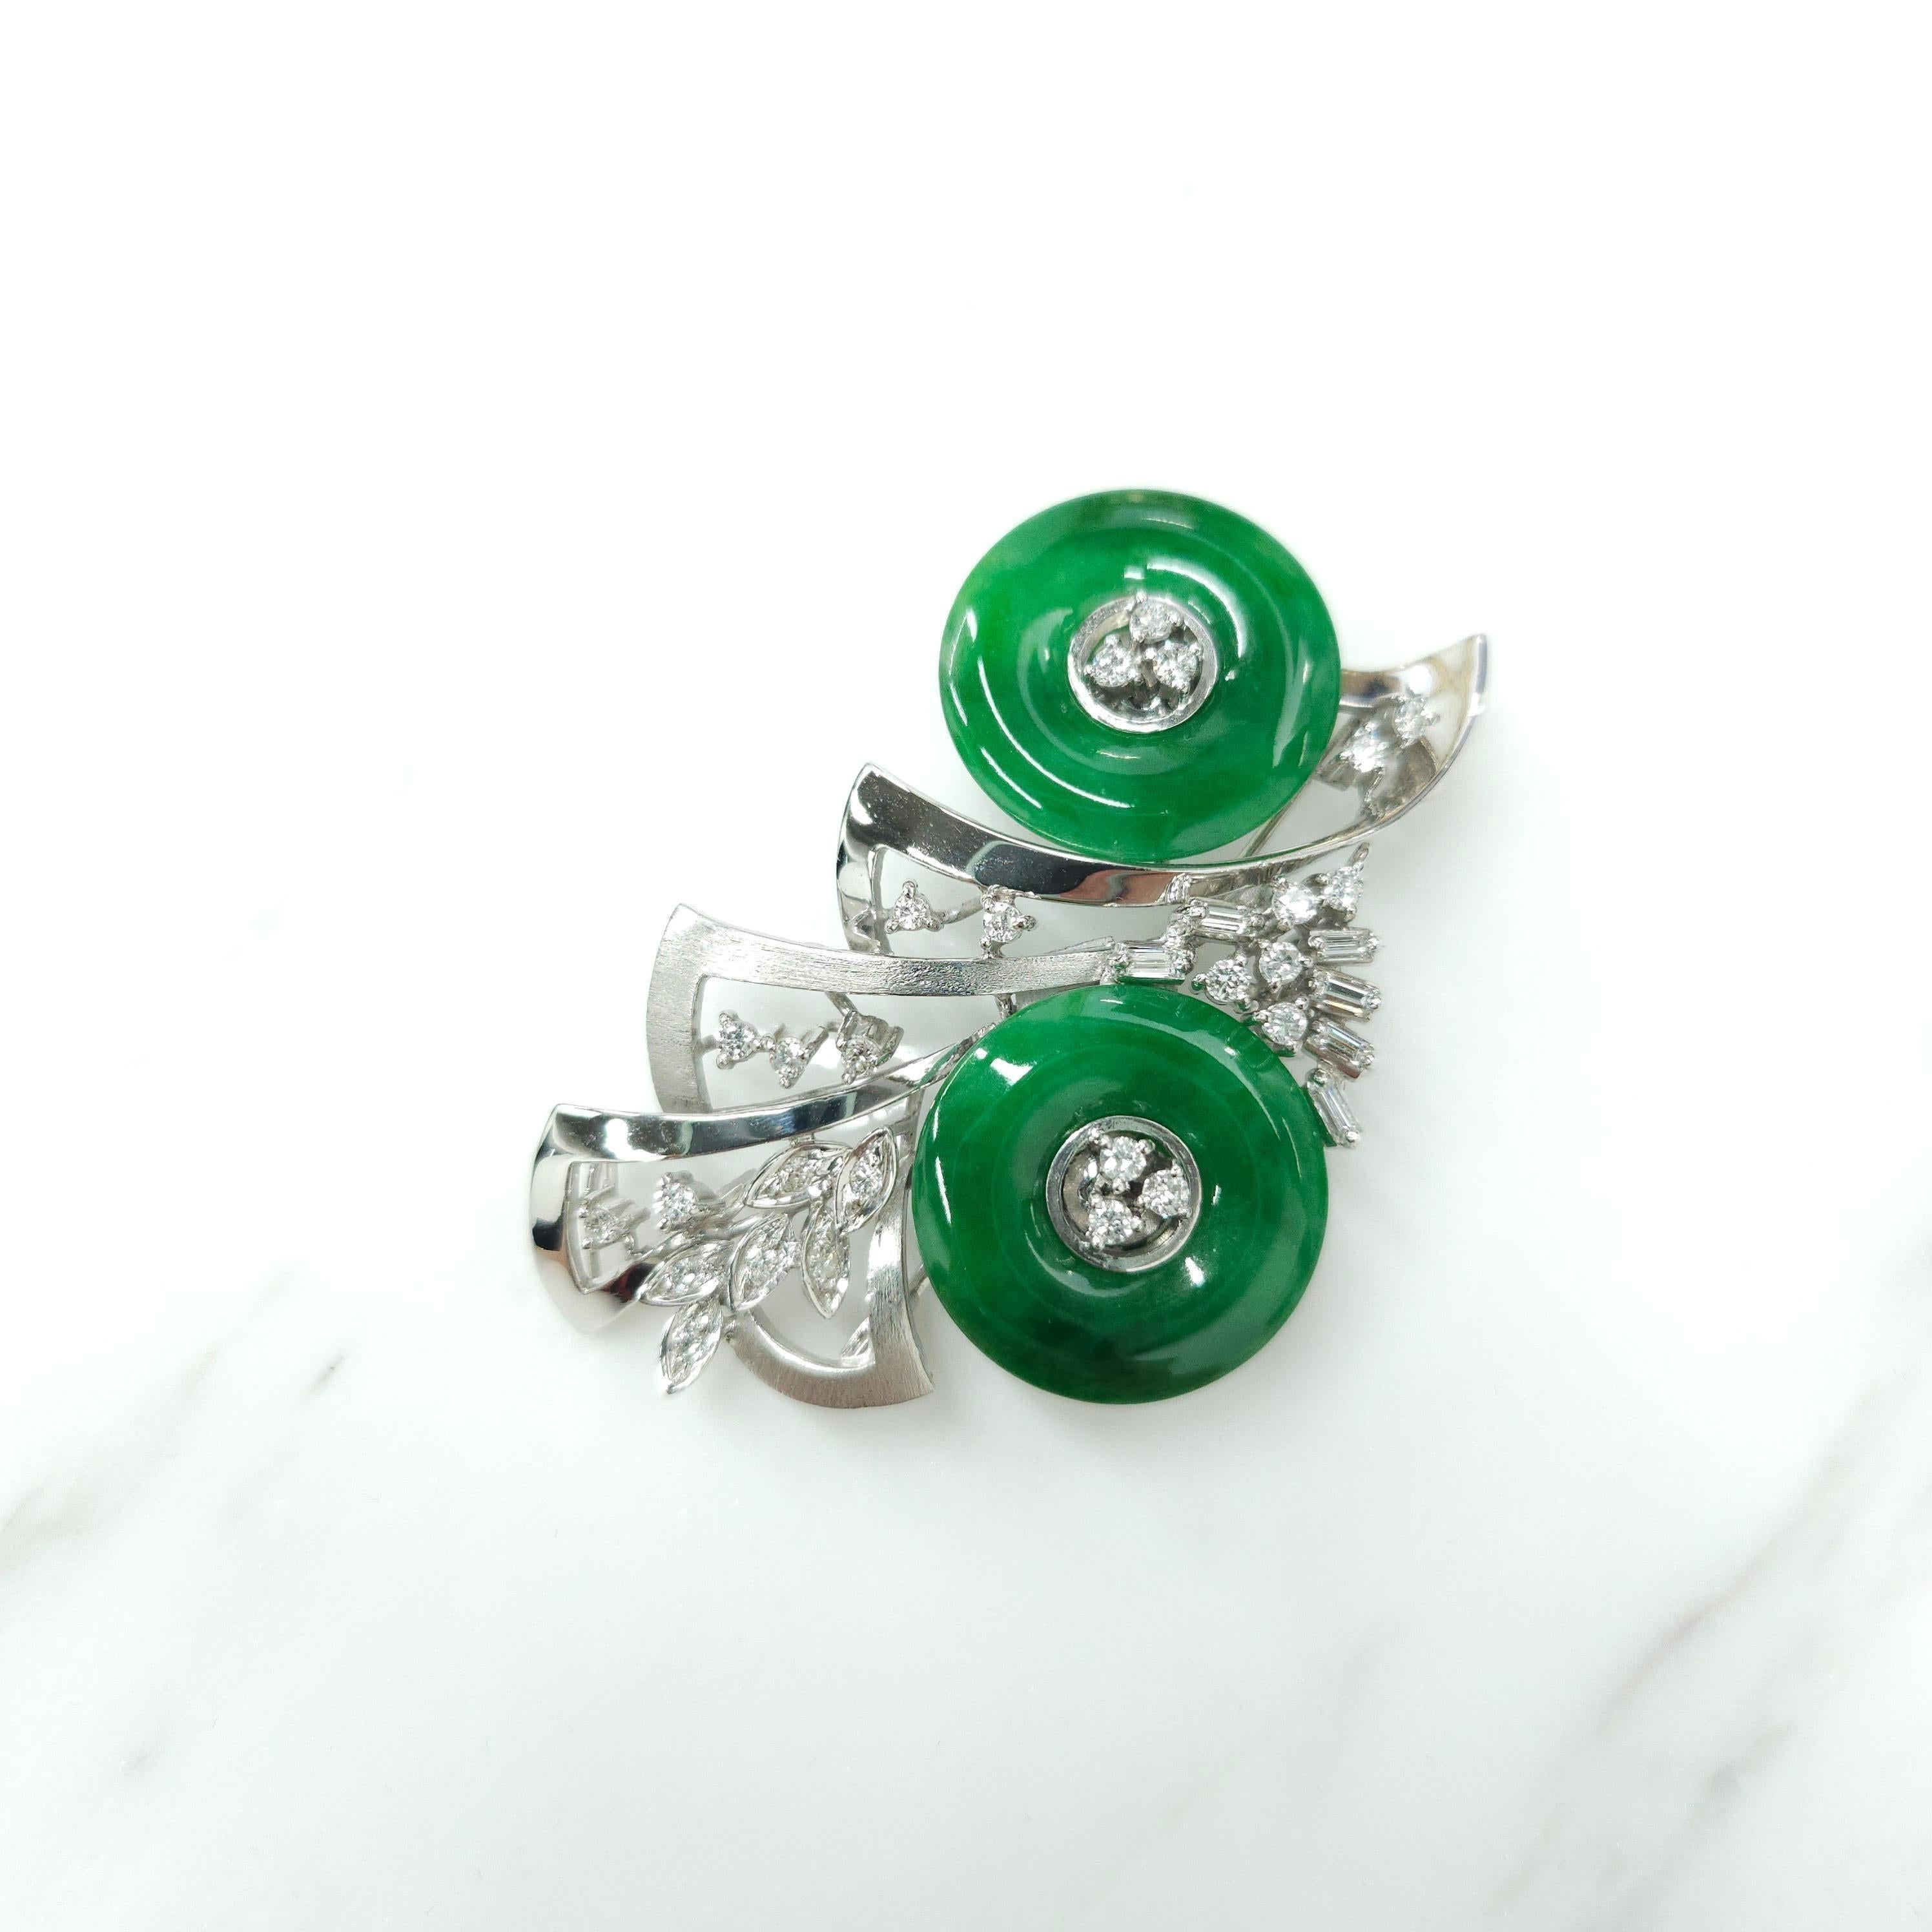 Elevate your accessory game with this one-of-a-kind white gold brooch featuring two pieces of Certified natural A grade Jade (Fei sui) in an intense green color and unique huaigu shape, making it a true treasure to behold. The vibrant green hue of